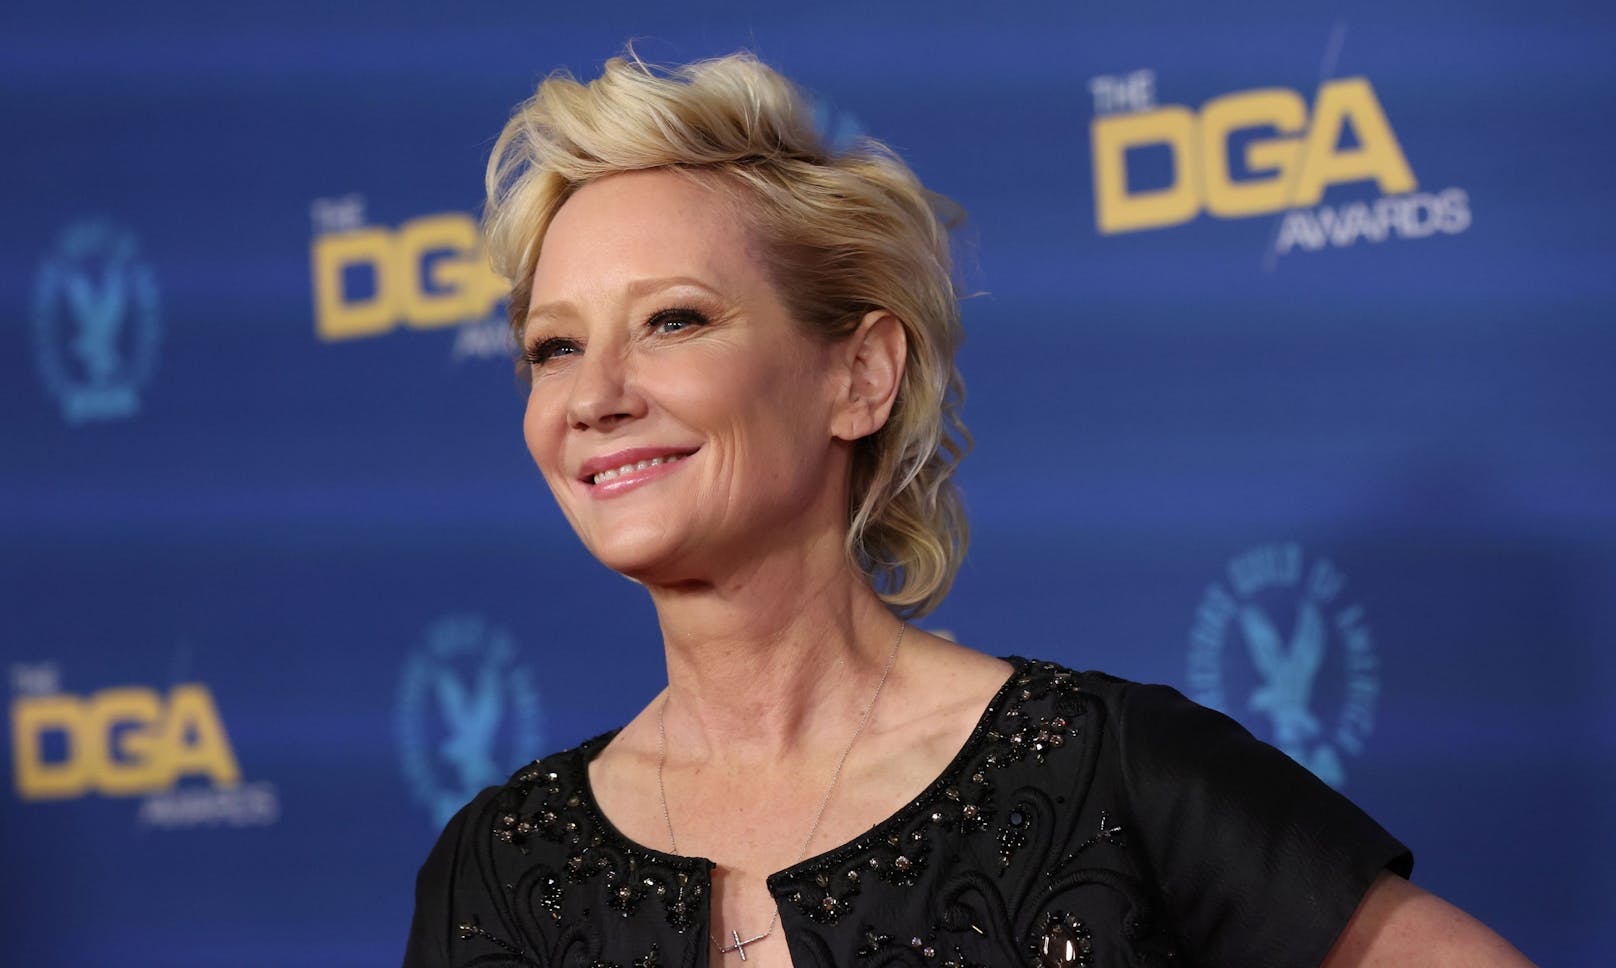 Actor Anne Heche attends the 74th Annual Directors Guild of America (DGA) Awards in Beverly Hills, California, U.S., March 12, 2022. REUTERS/Mario Anzuoni